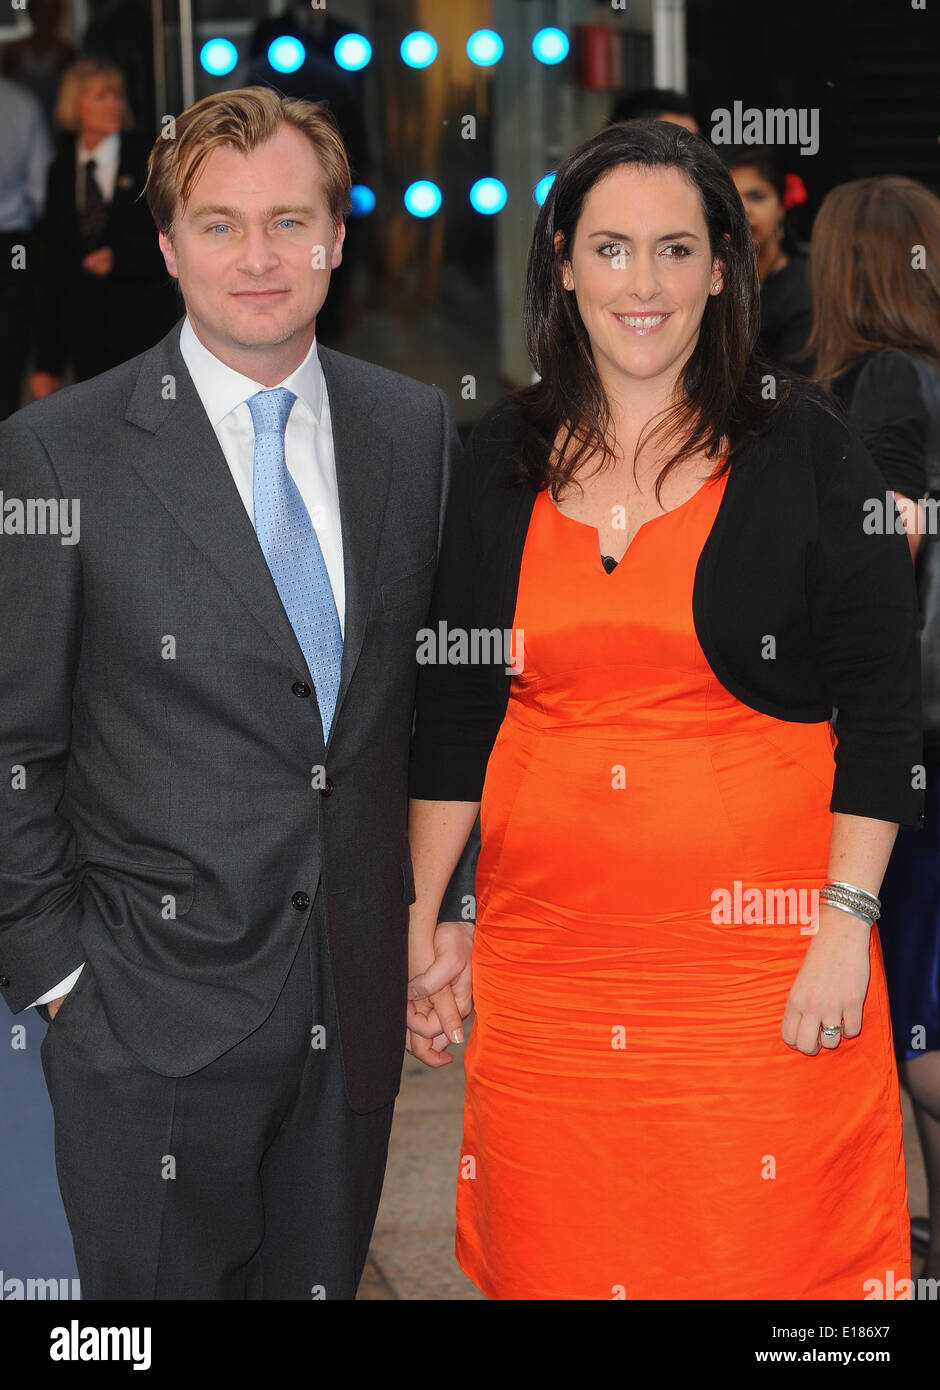 London, UK, UK. 8th July, 2010. Christopher Nolan attends the World Premiere of 'Inception' at Odeon Leicester Square. © Ferdaus Shamim/ZUMA Wire/ZUMAPRESS.com/Alamy Live News Stock Photo